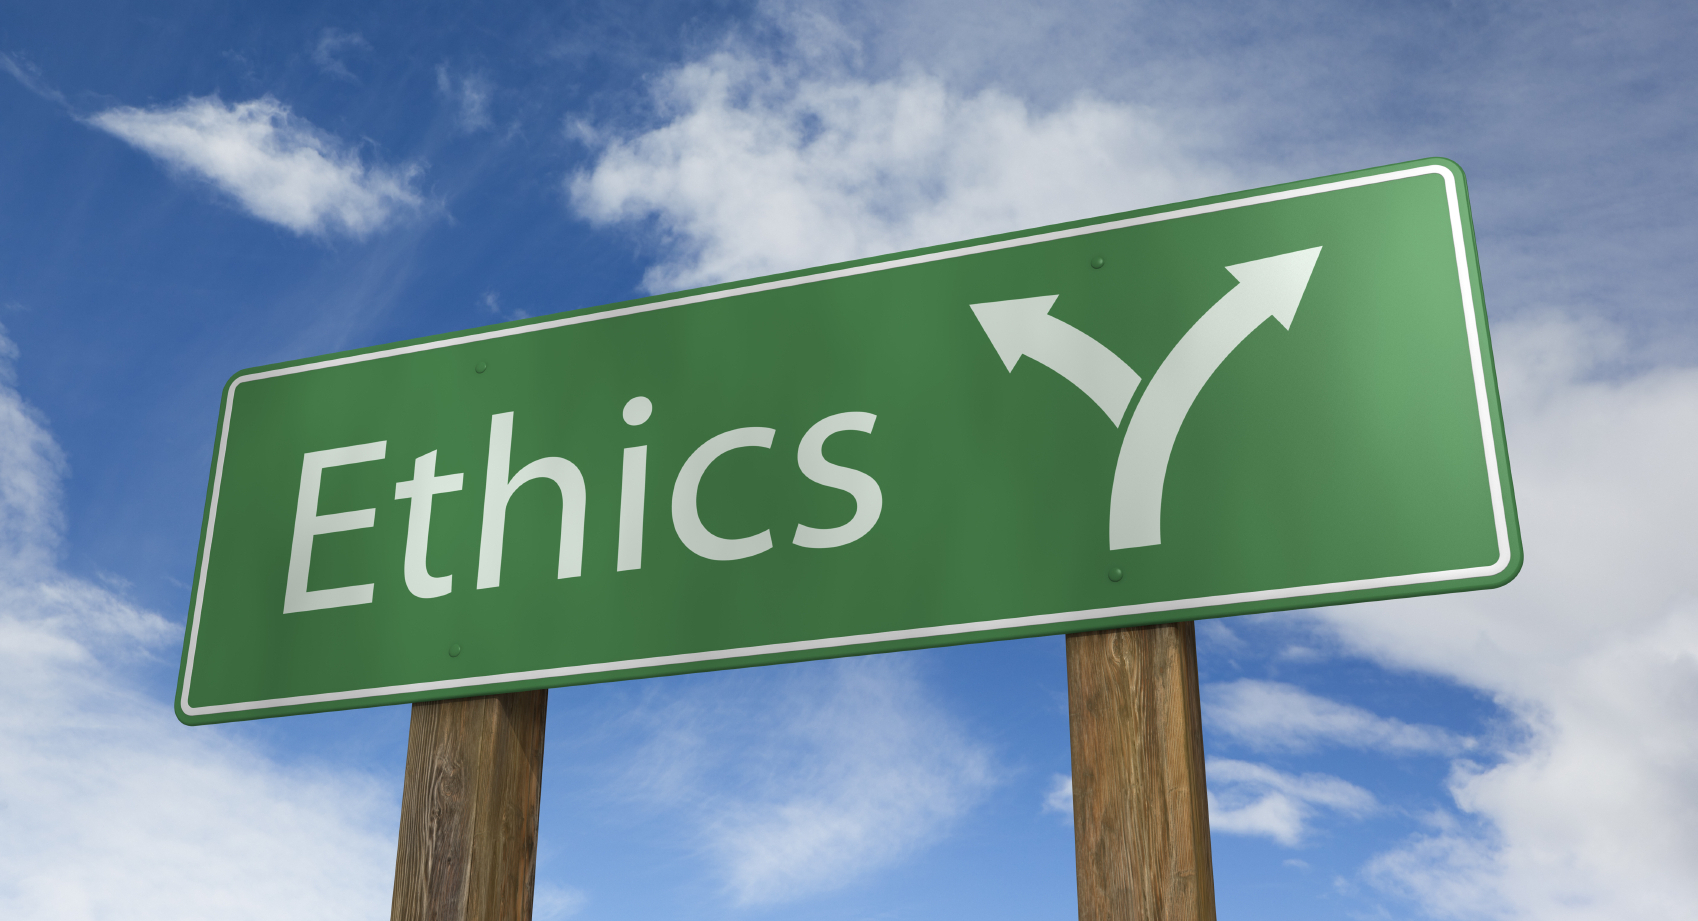 Ethics-Cropped_5722a54a0def3.jpg